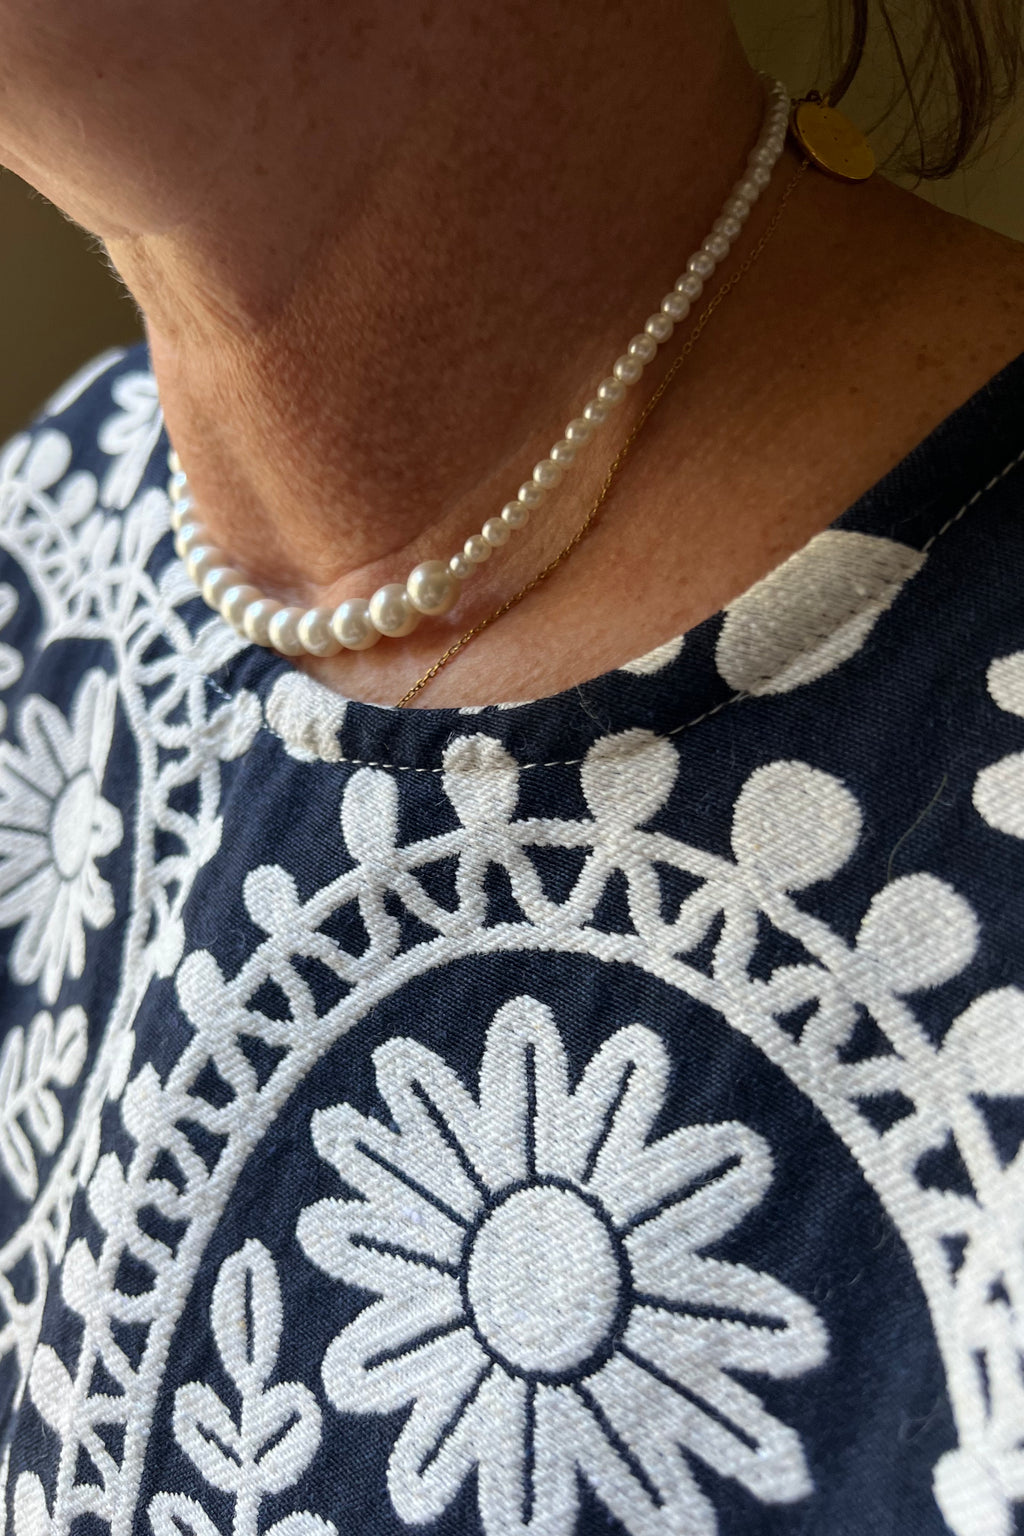 Mathe Girls & Pearls Necklace - The Mercantile London